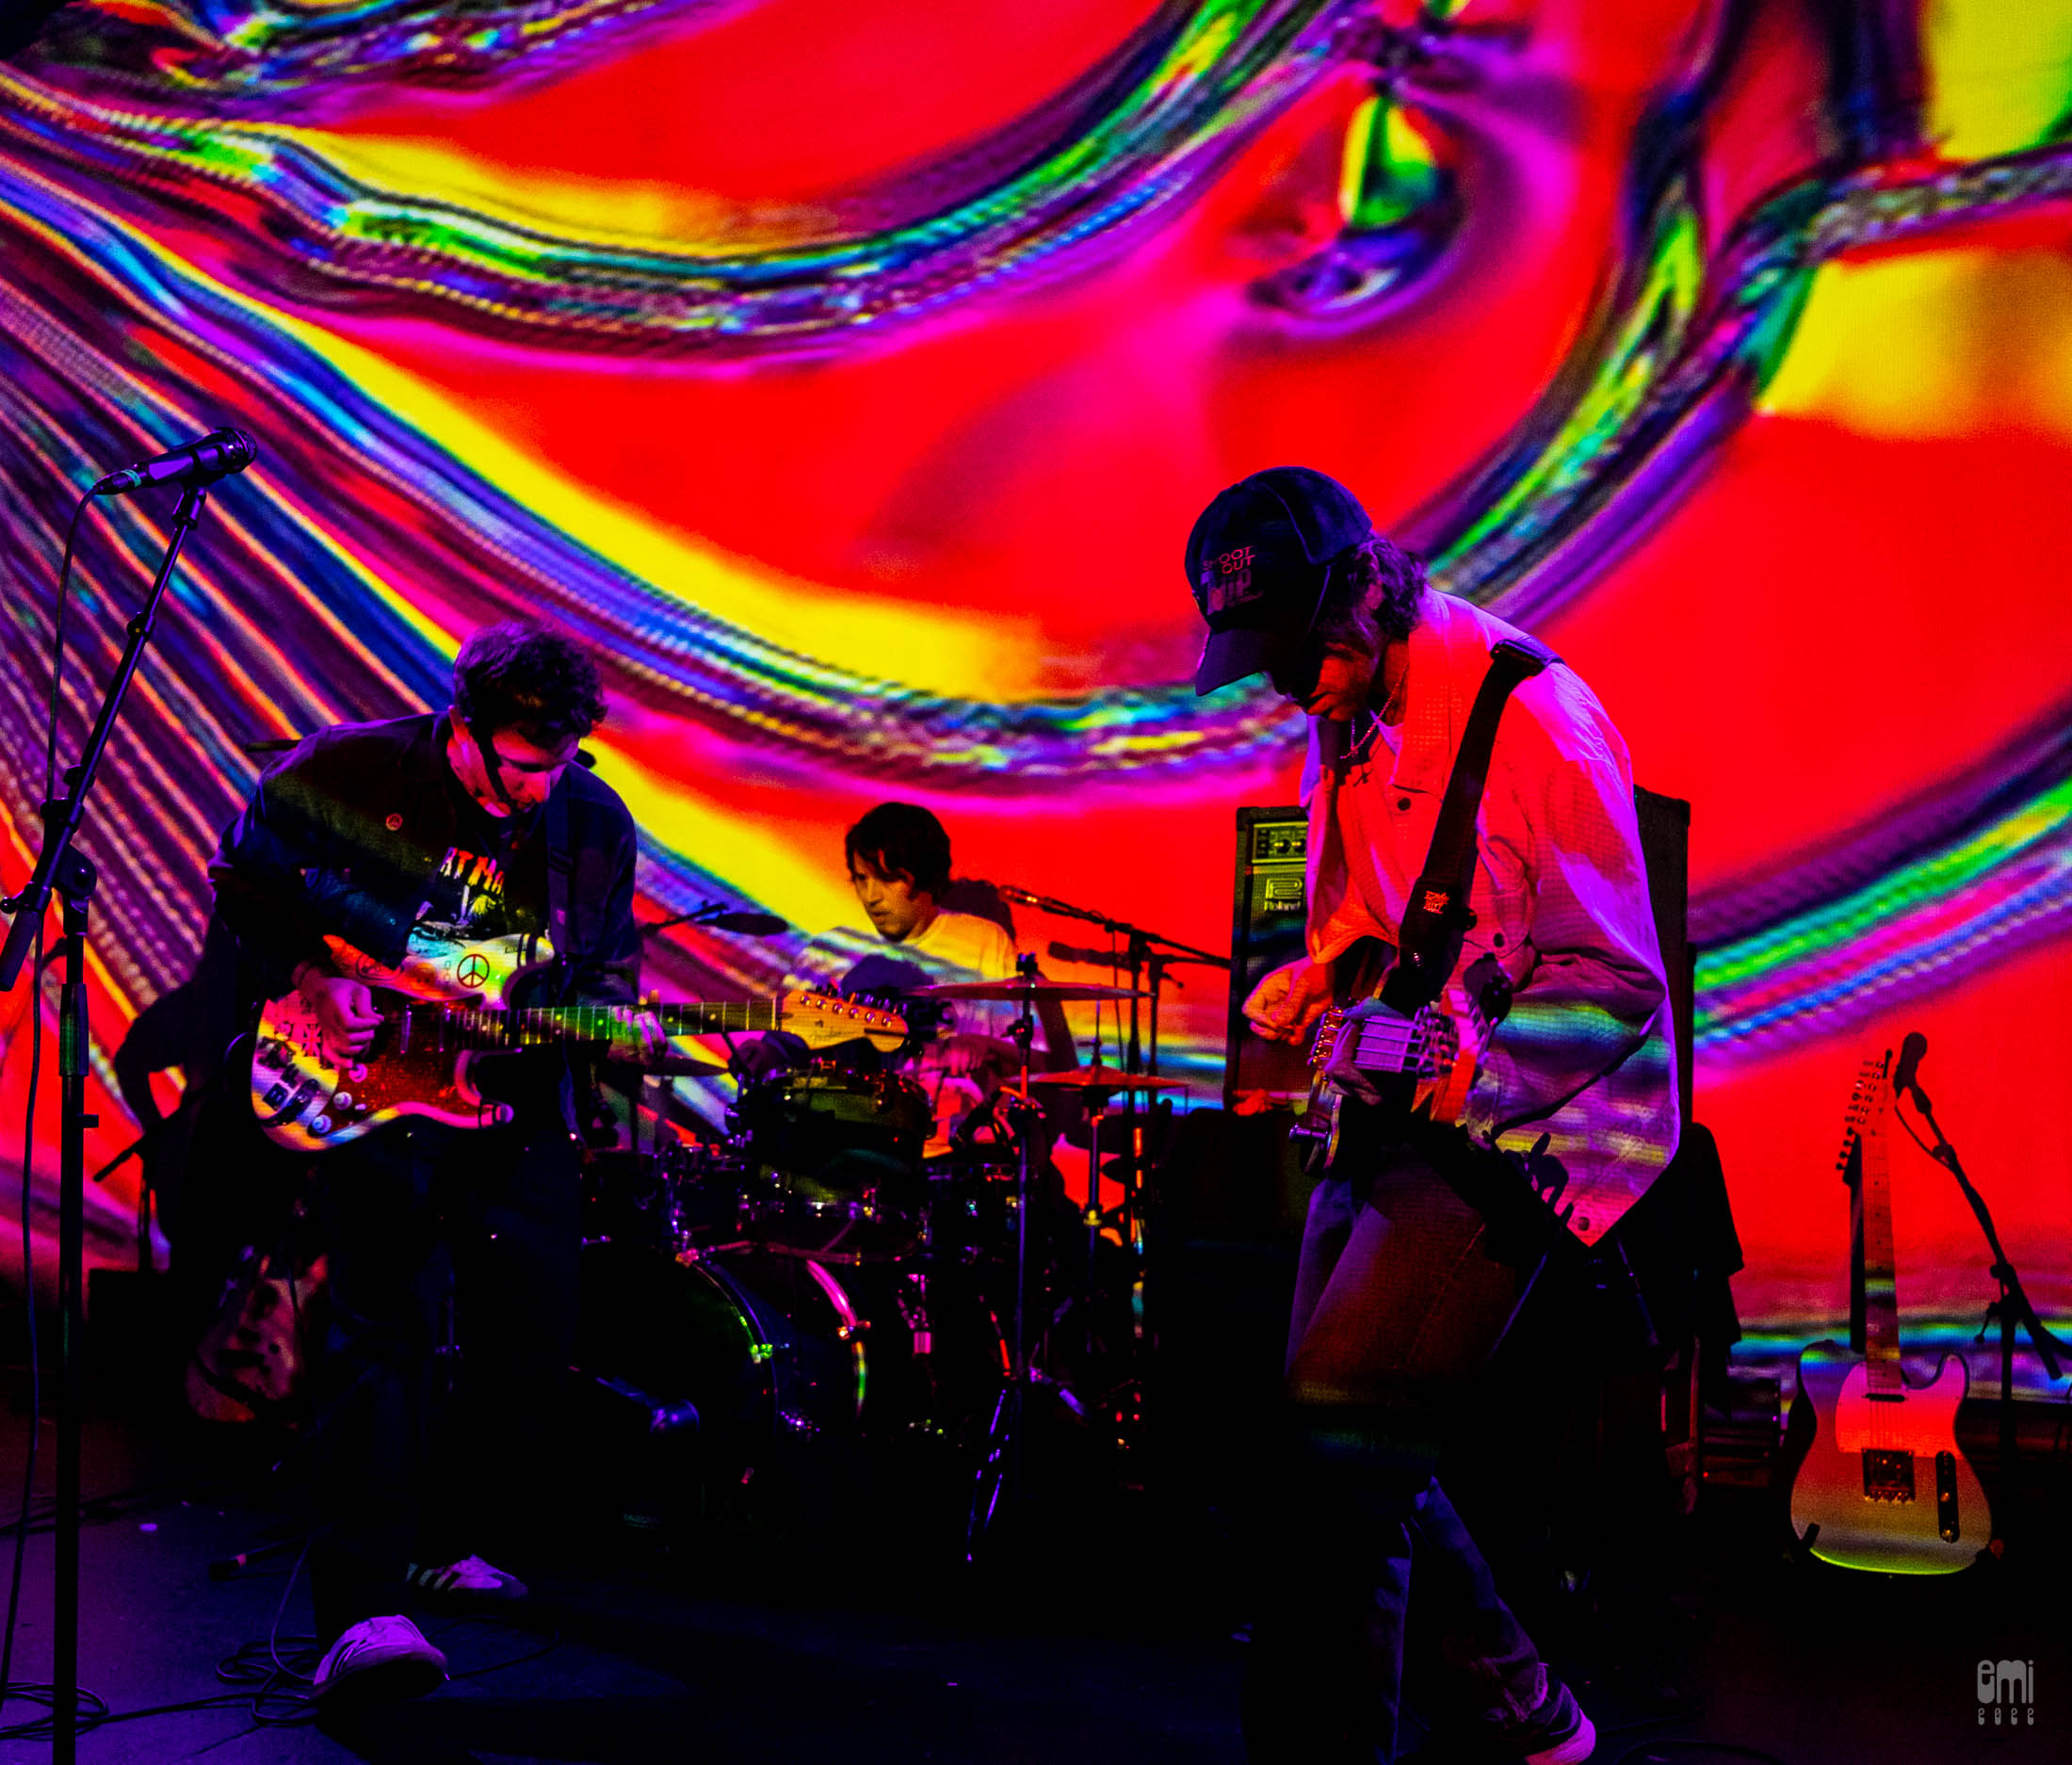 20221018 BEACH FOSSILS with Zach Rodell Video Projection at The Chapel SF. photo by emi